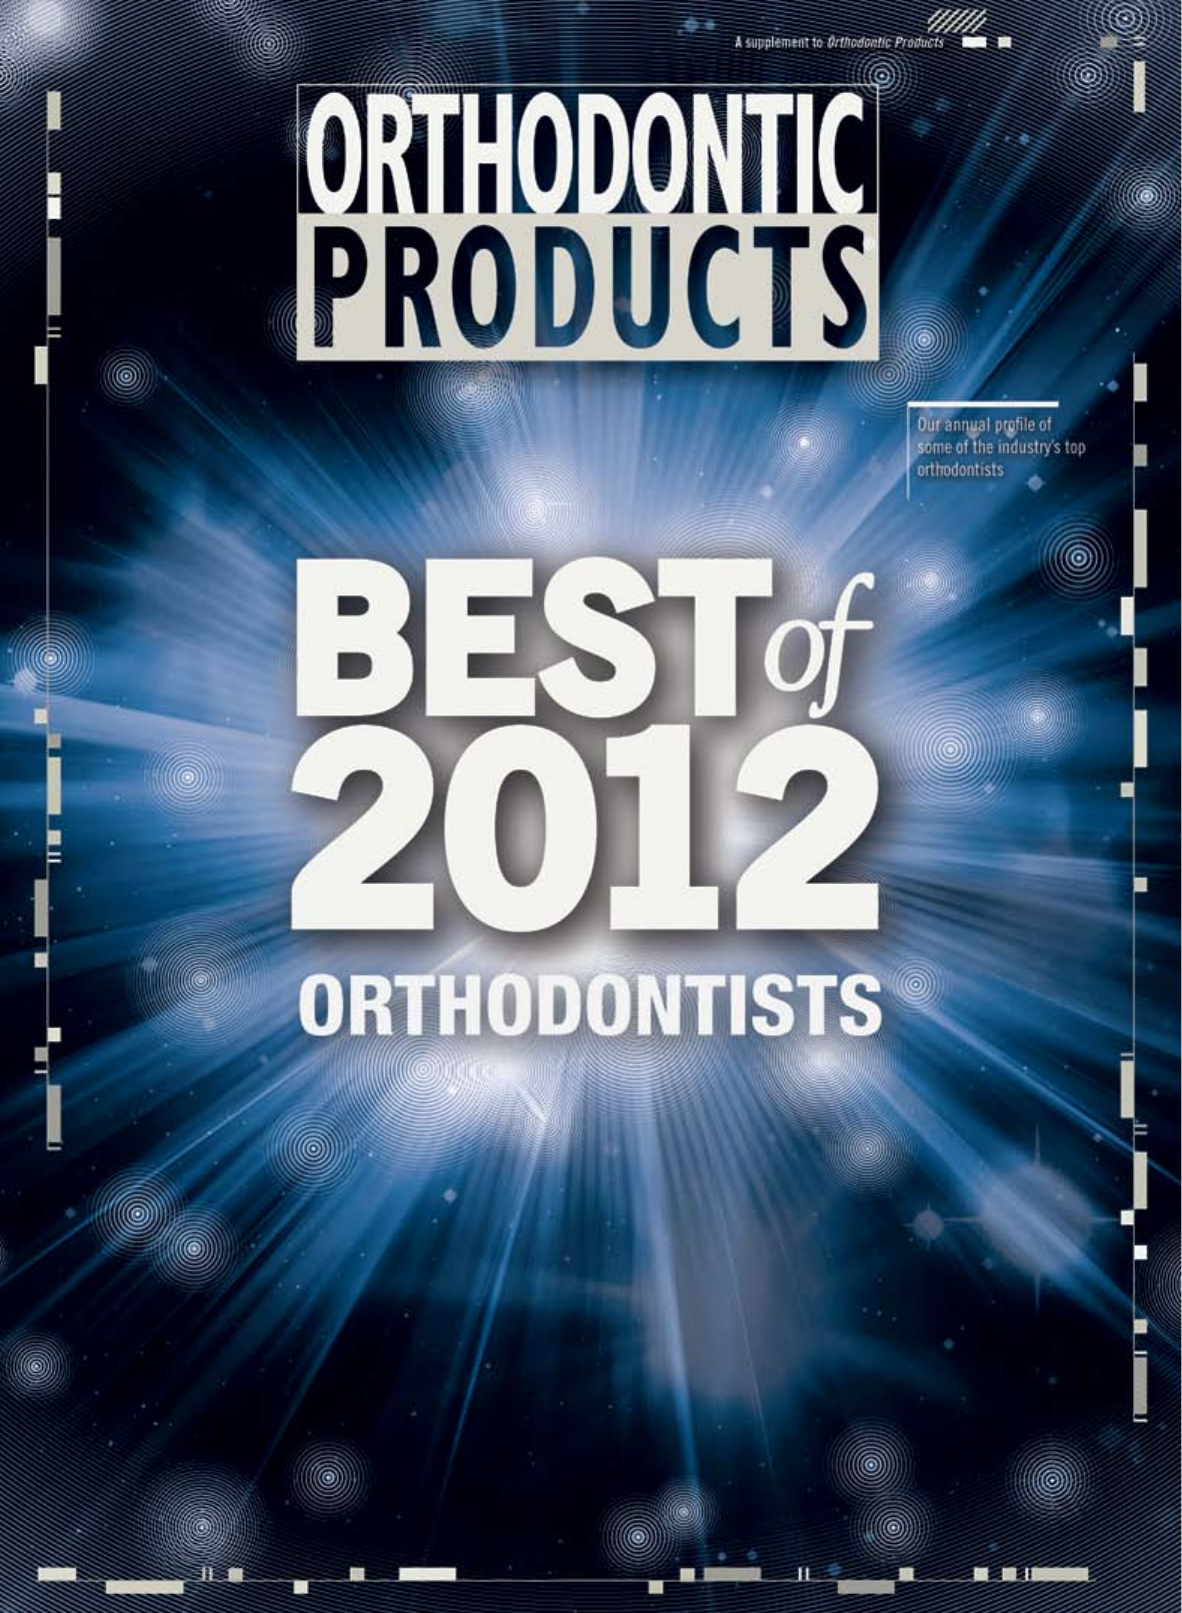 Page 1 of 7 - Images Editorial Orthodontic-products Pdf OP Best2012